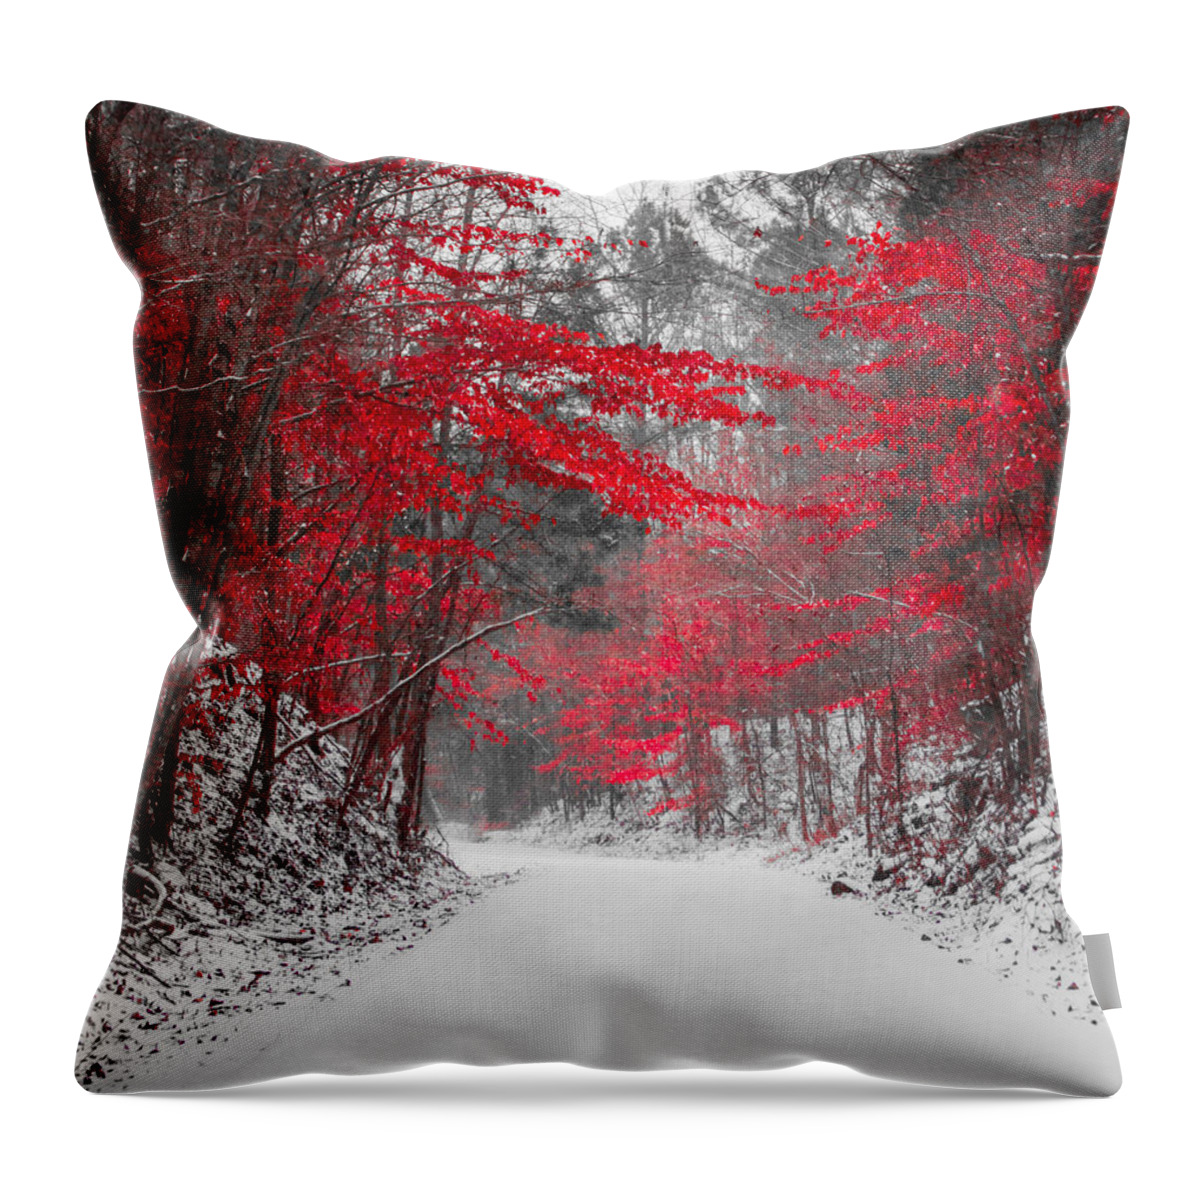 Red Blossoms Throw Pillow featuring the photograph Red Blossoms Horizontal by Parker Cunningham